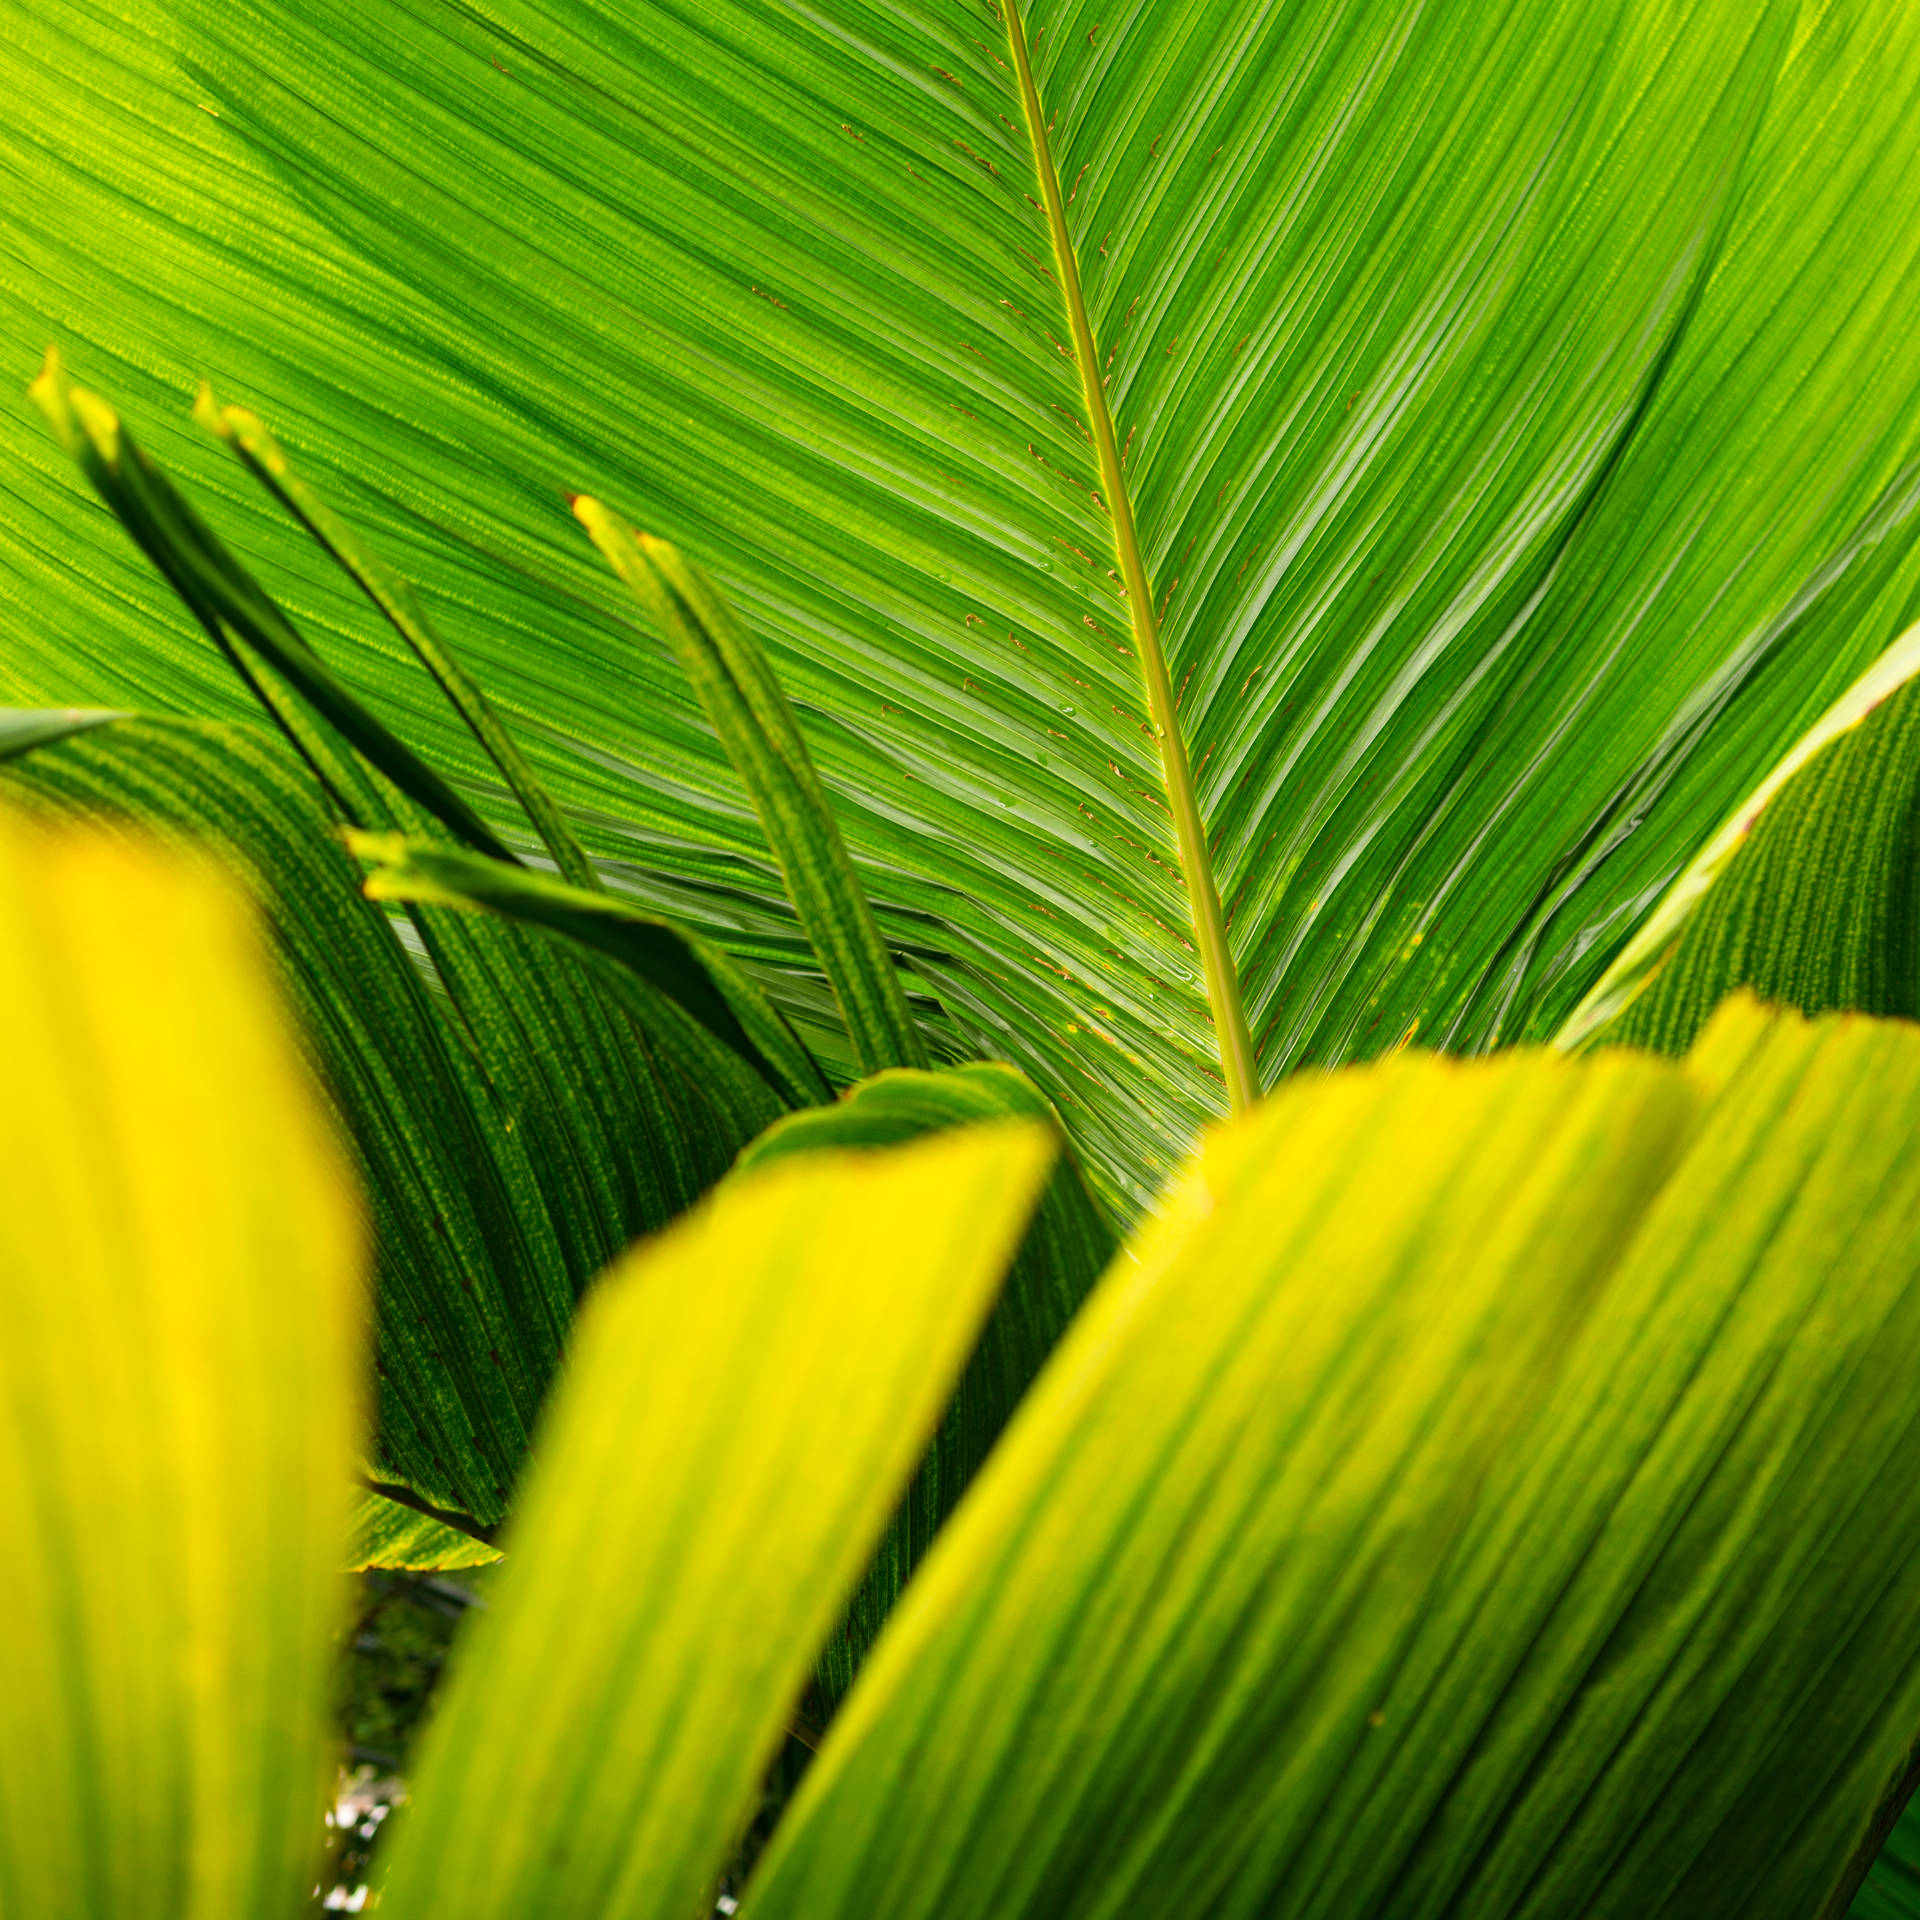 Banana Leaf 4779X4779 Wallpaper and Background Image